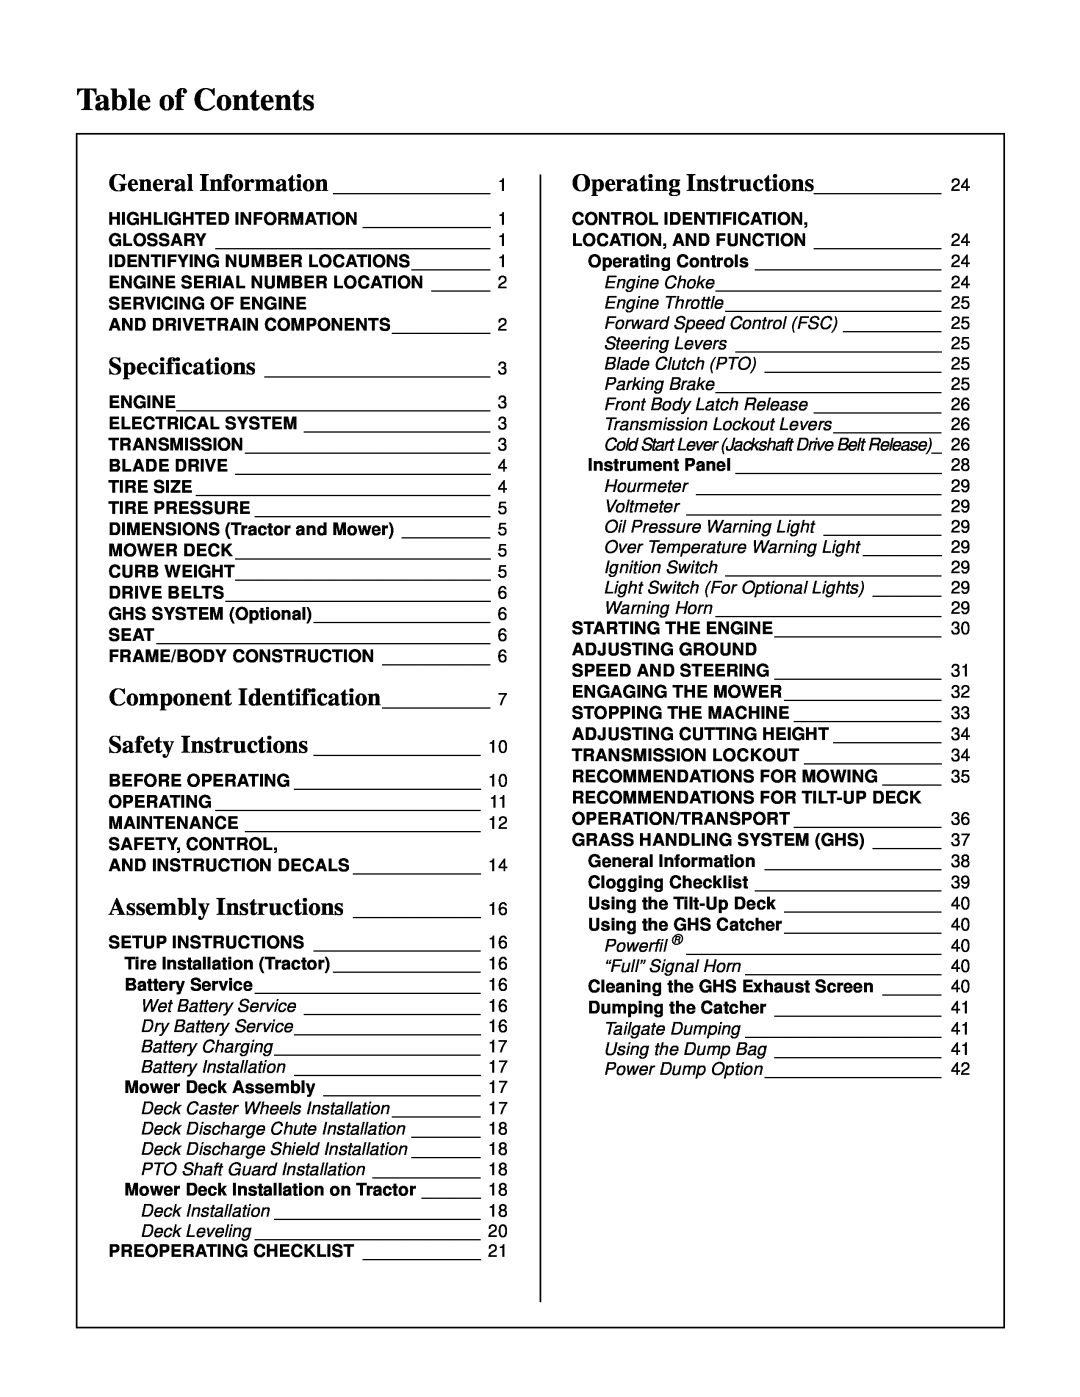 Walker MT Table of Contents, General Information, Component Identification Safety Instructions, Assembly Instructions 